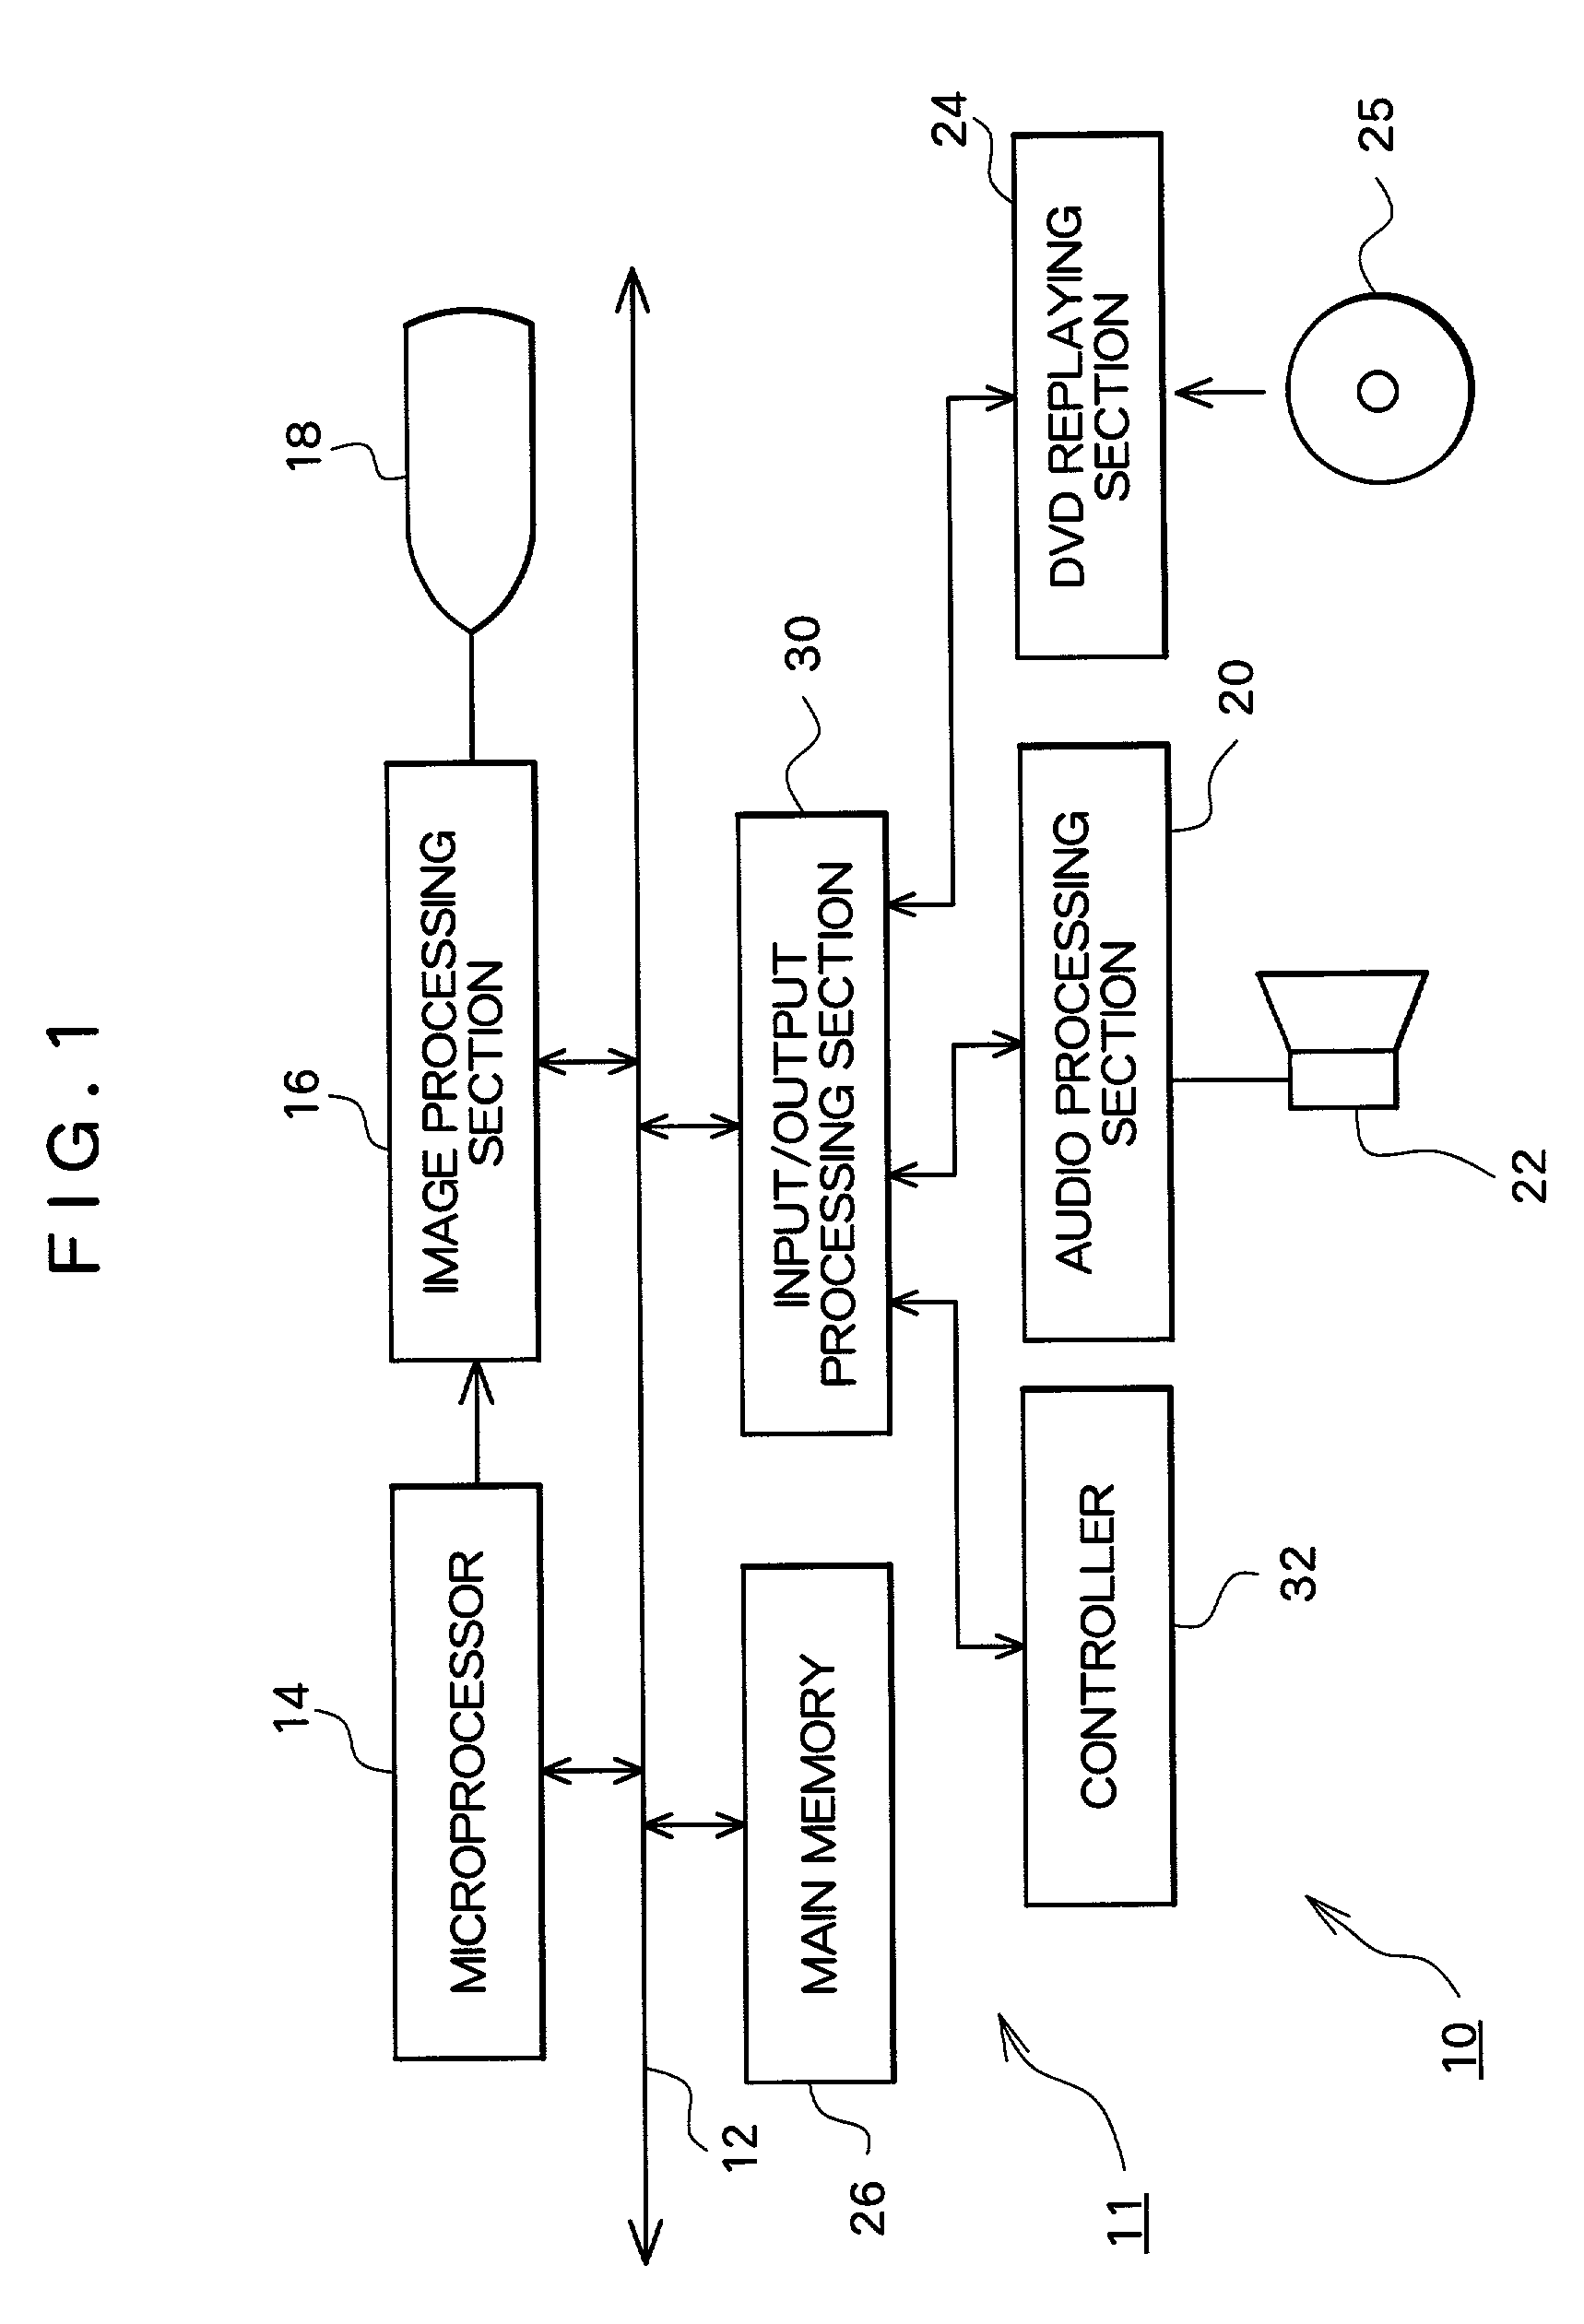 Image processing device and method for generating changes in the light and shade pattern of an image